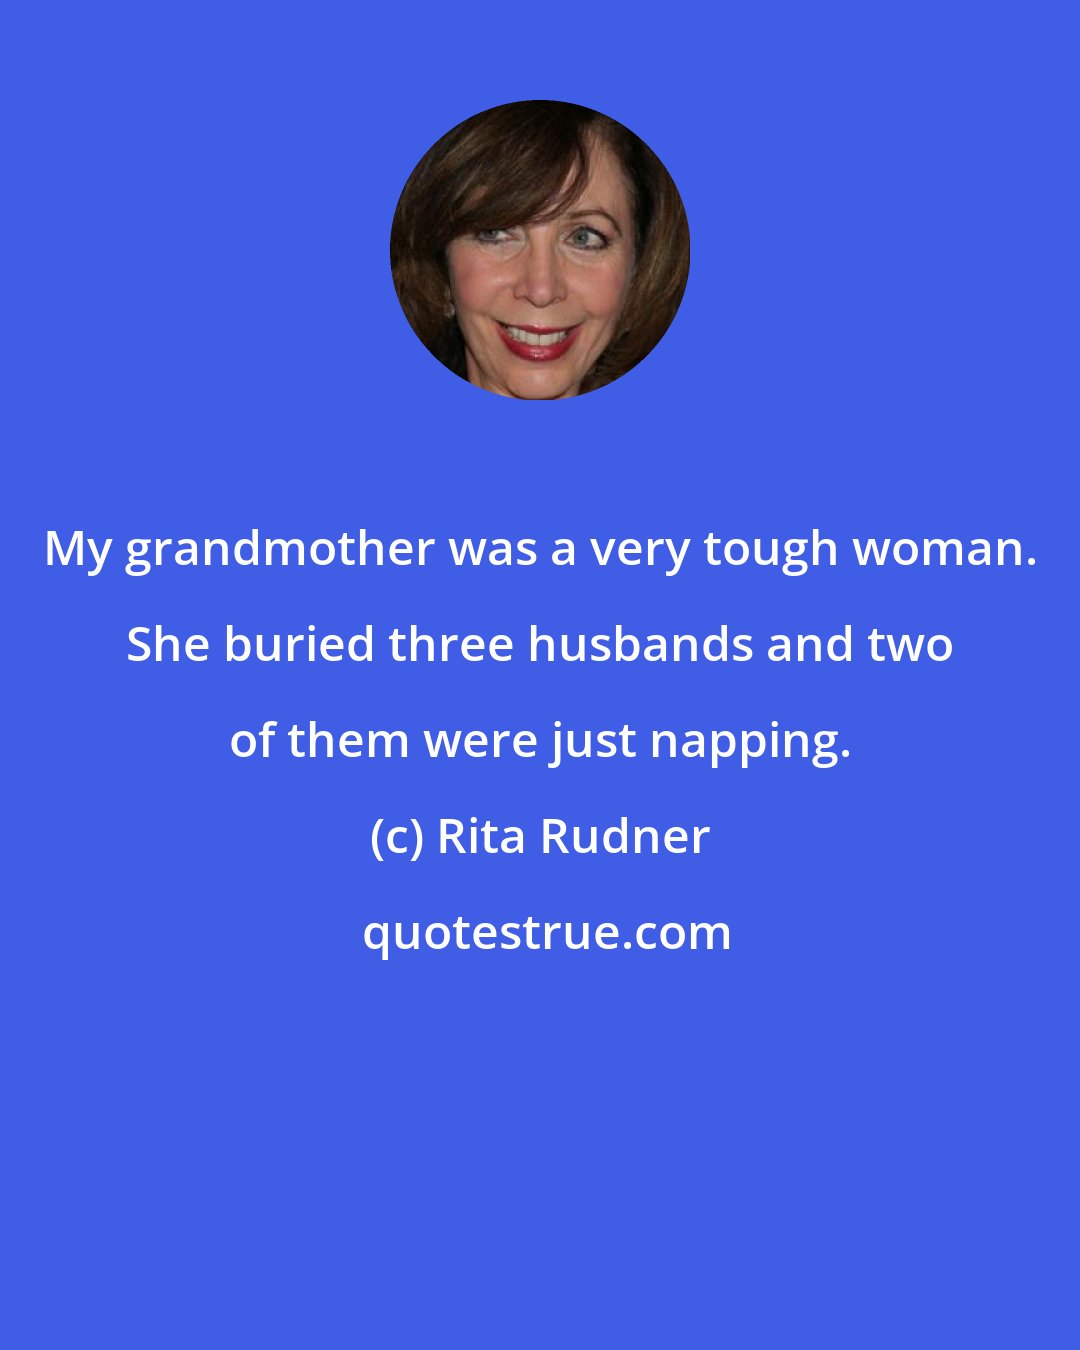 Rita Rudner: My grandmother was a very tough woman. She buried three husbands and two of them were just napping.